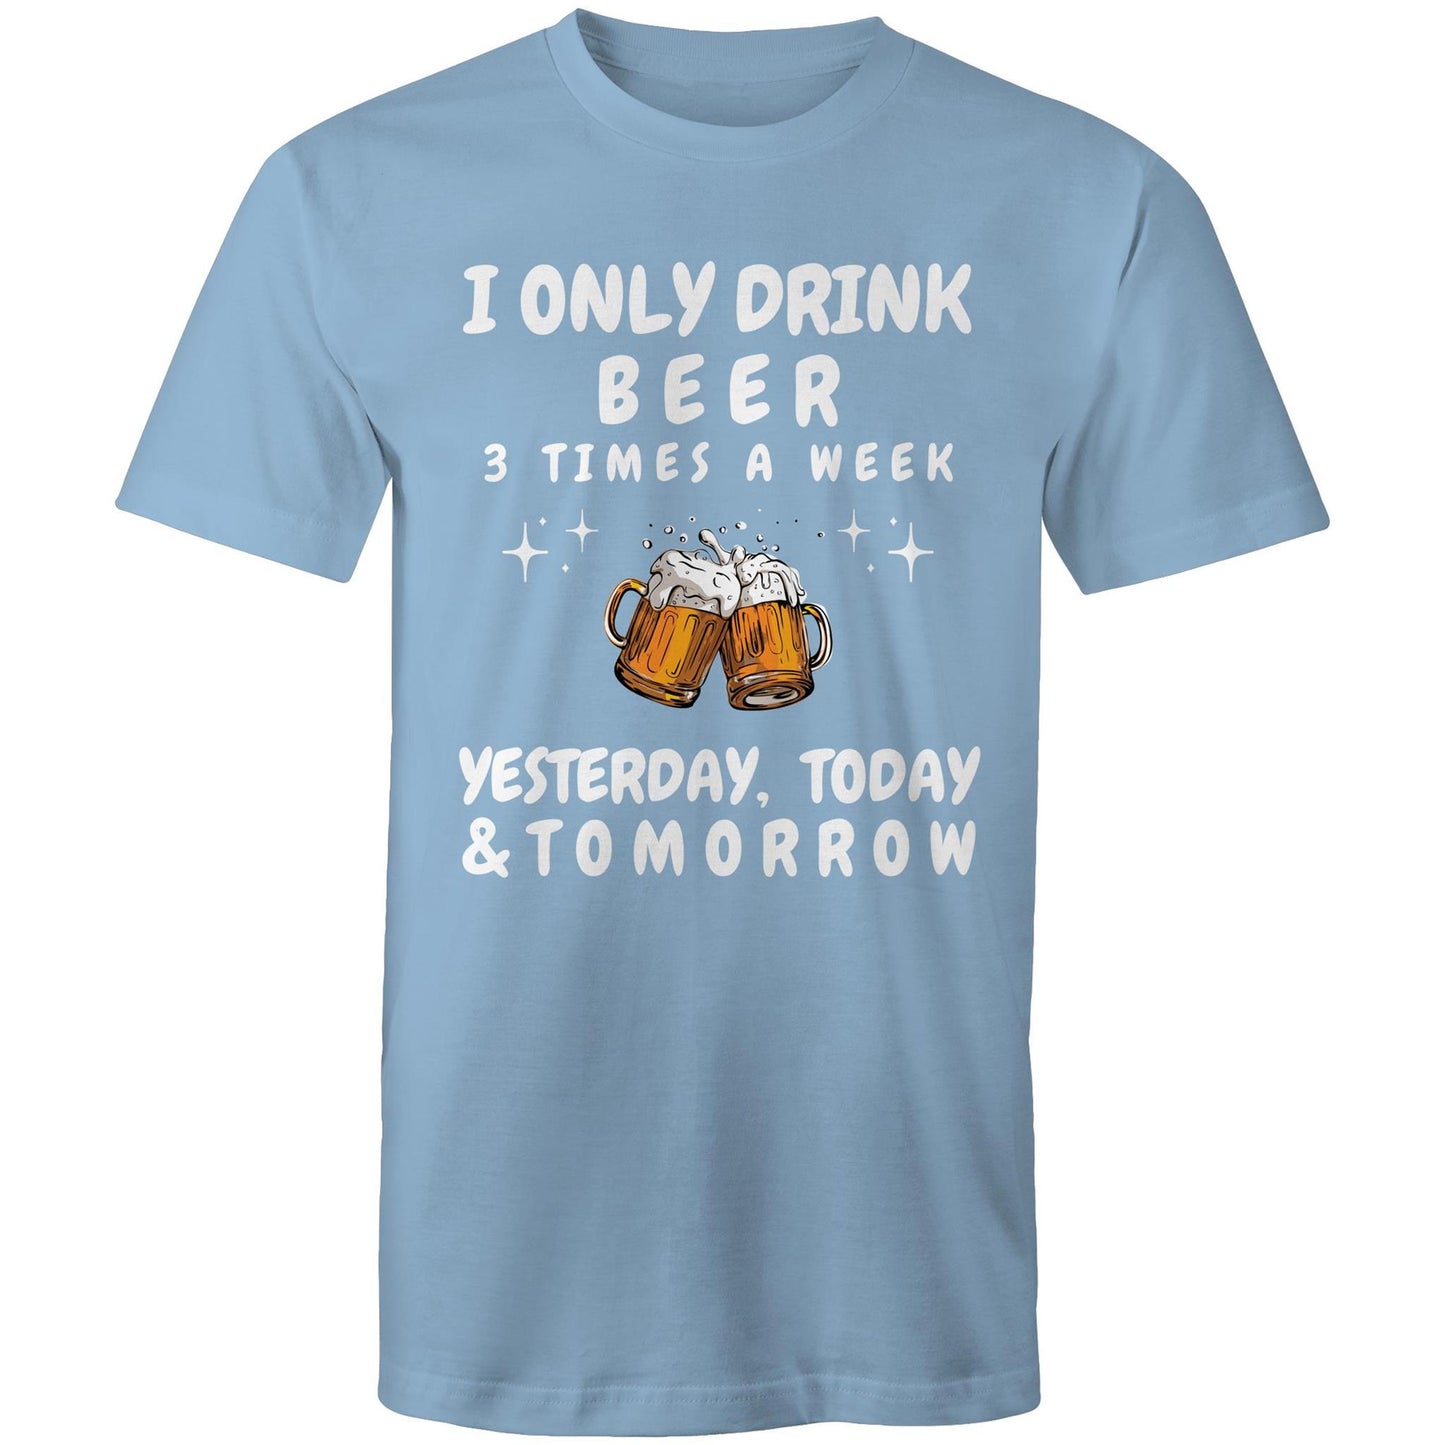 I Only Drink Beer 3 Times a Week - Mens T-Shirt